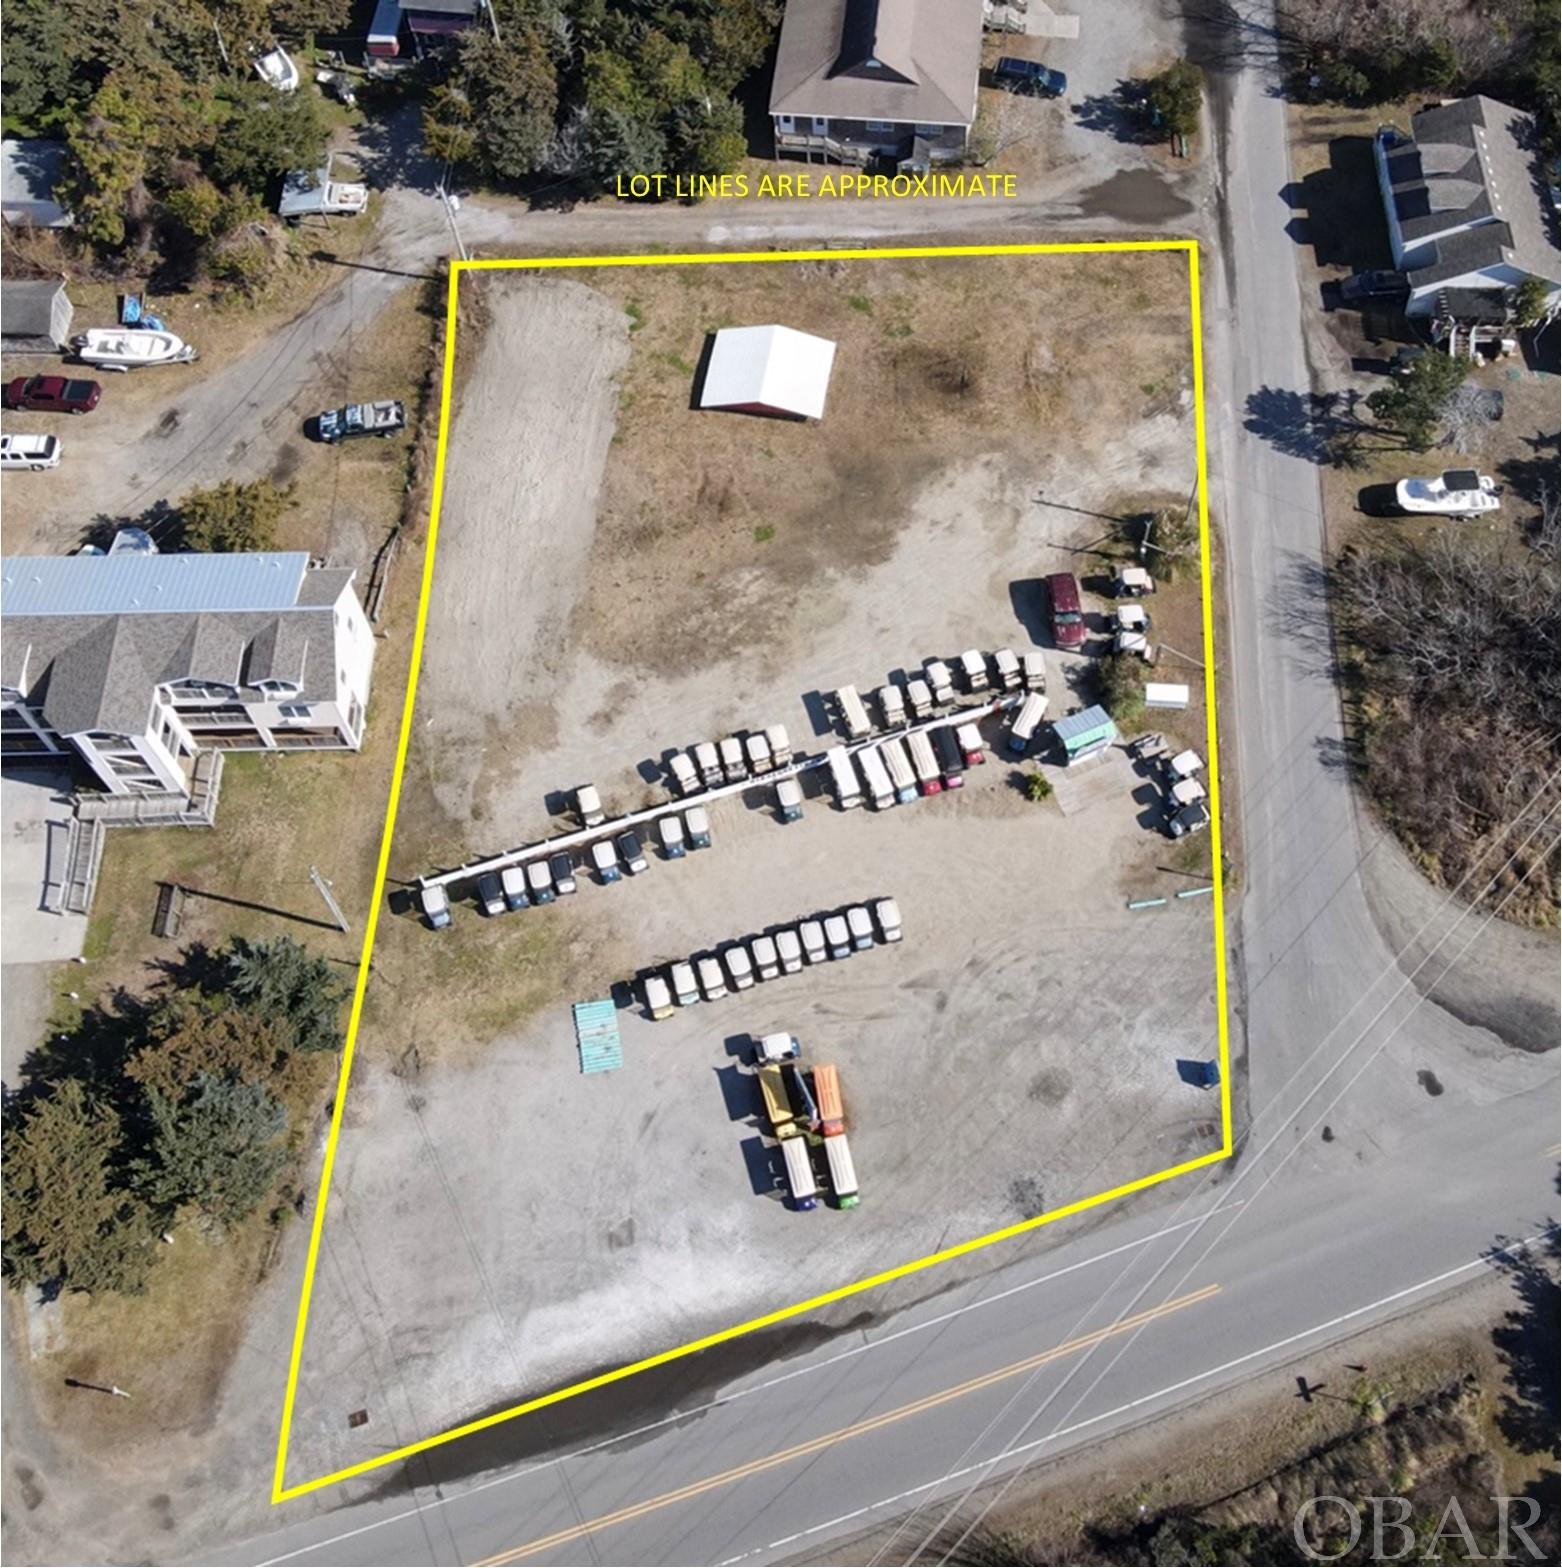 Make your dream a reality on Ocracoke Island! Large corner commercial lot on Hwy 12 with endless possibilities.  Prime location within walking distance to retail shops, convenience store and restaurants. Currently being utilized as a successful golf cart rental business with 90 plus golf carts.  Cart business and all equipment is included in the sale of the land. The expansive lot could be subdivided for future development. Electric and water meter on site.  One of a kind opportunity to build and create a live/work space by building shops, housing, rental units, etc.